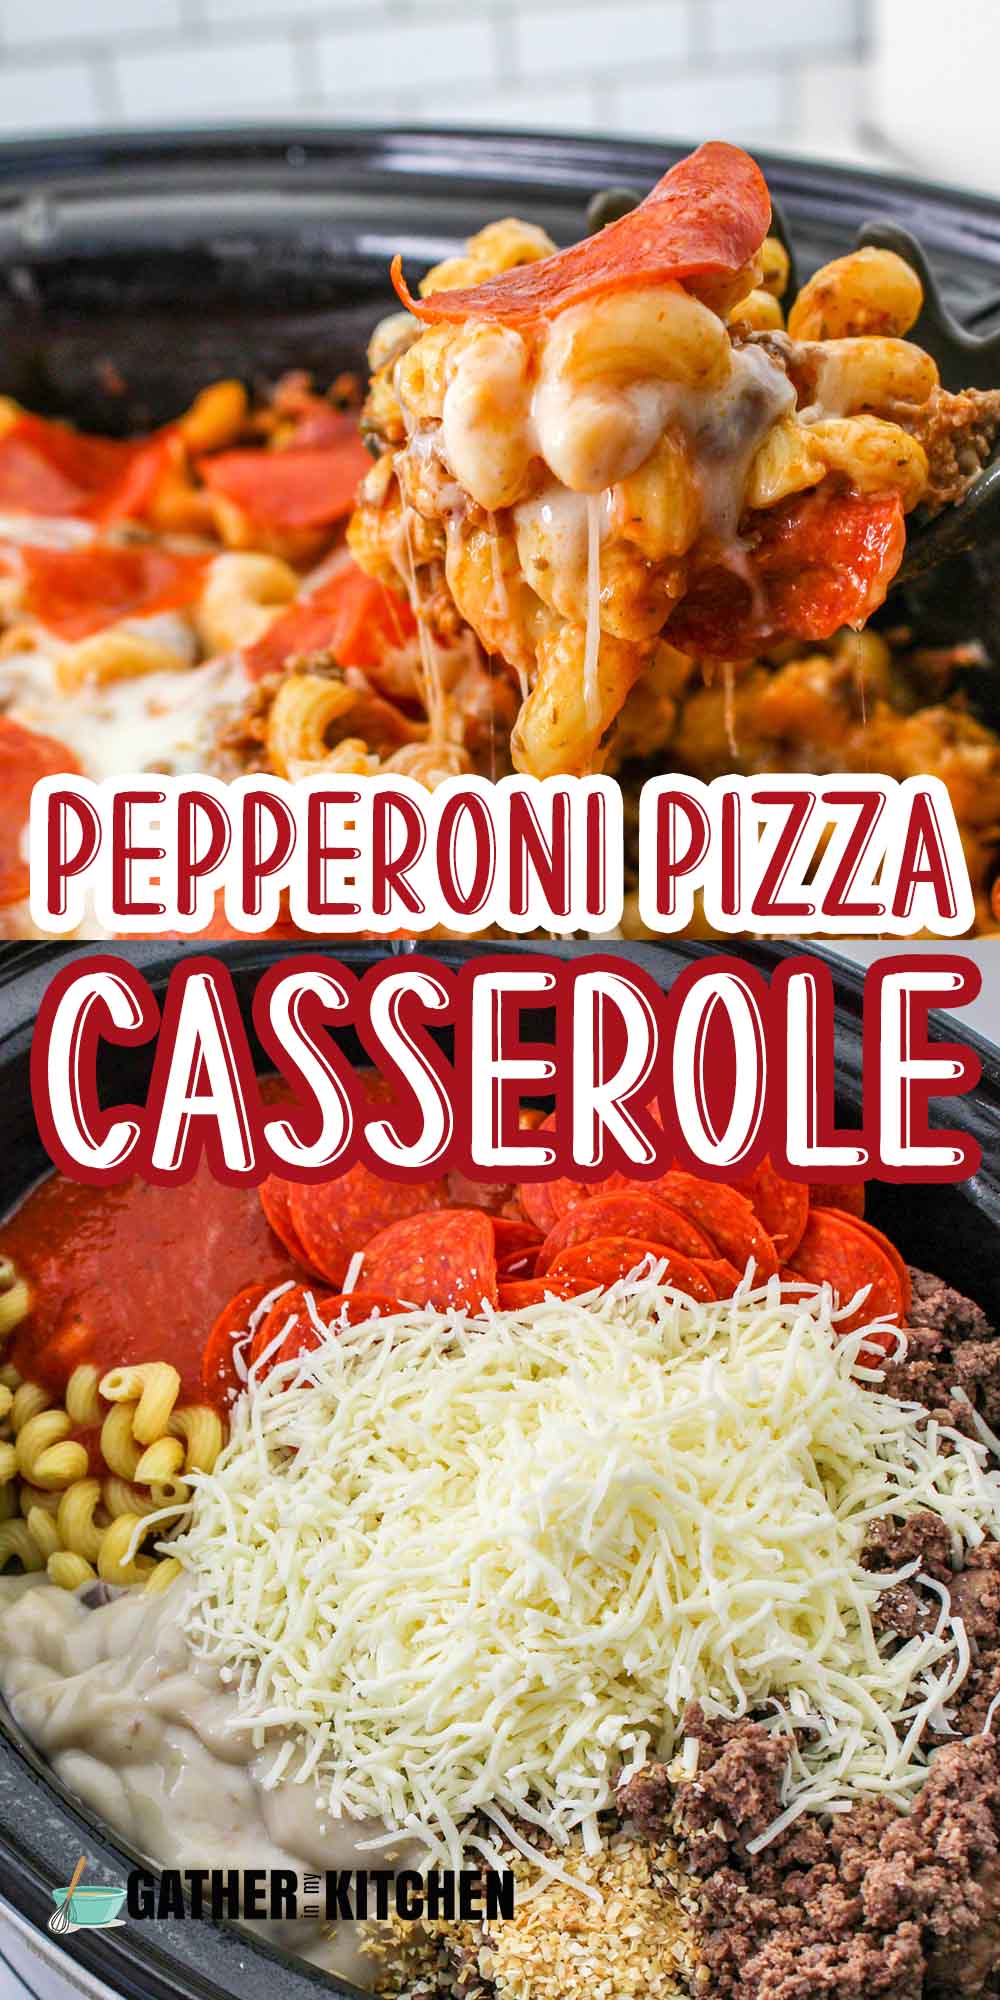 Pin image: top shows a portion of pepperoni pizza casserole on a spatula, middle says "Pepperoni Pizza Casserole" and bottom shows ingredients in a pot.